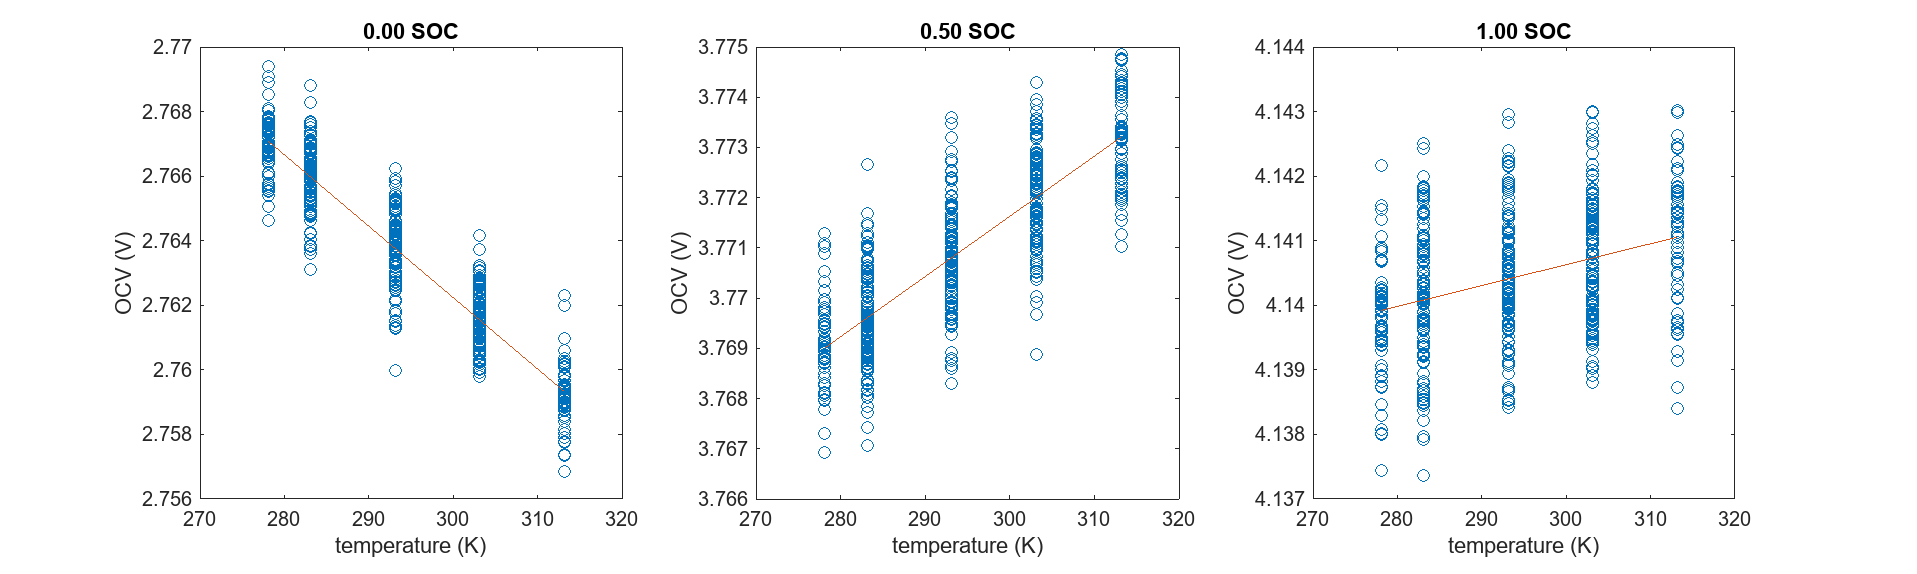 Figure contains 3 axes objects. Axes object 1 with title 0.00 SOC, xlabel temperature (K), ylabel OCV (V) contains 2 objects of type line. One or more of the lines displays its values using only markers Axes object 2 with title 0.50 SOC, xlabel temperature (K), ylabel OCV (V) contains 2 objects of type line. One or more of the lines displays its values using only markers Axes object 3 with title 1.00 SOC, xlabel temperature (K), ylabel OCV (V) contains 2 objects of type line. One or more of the lines displays its values using only markers